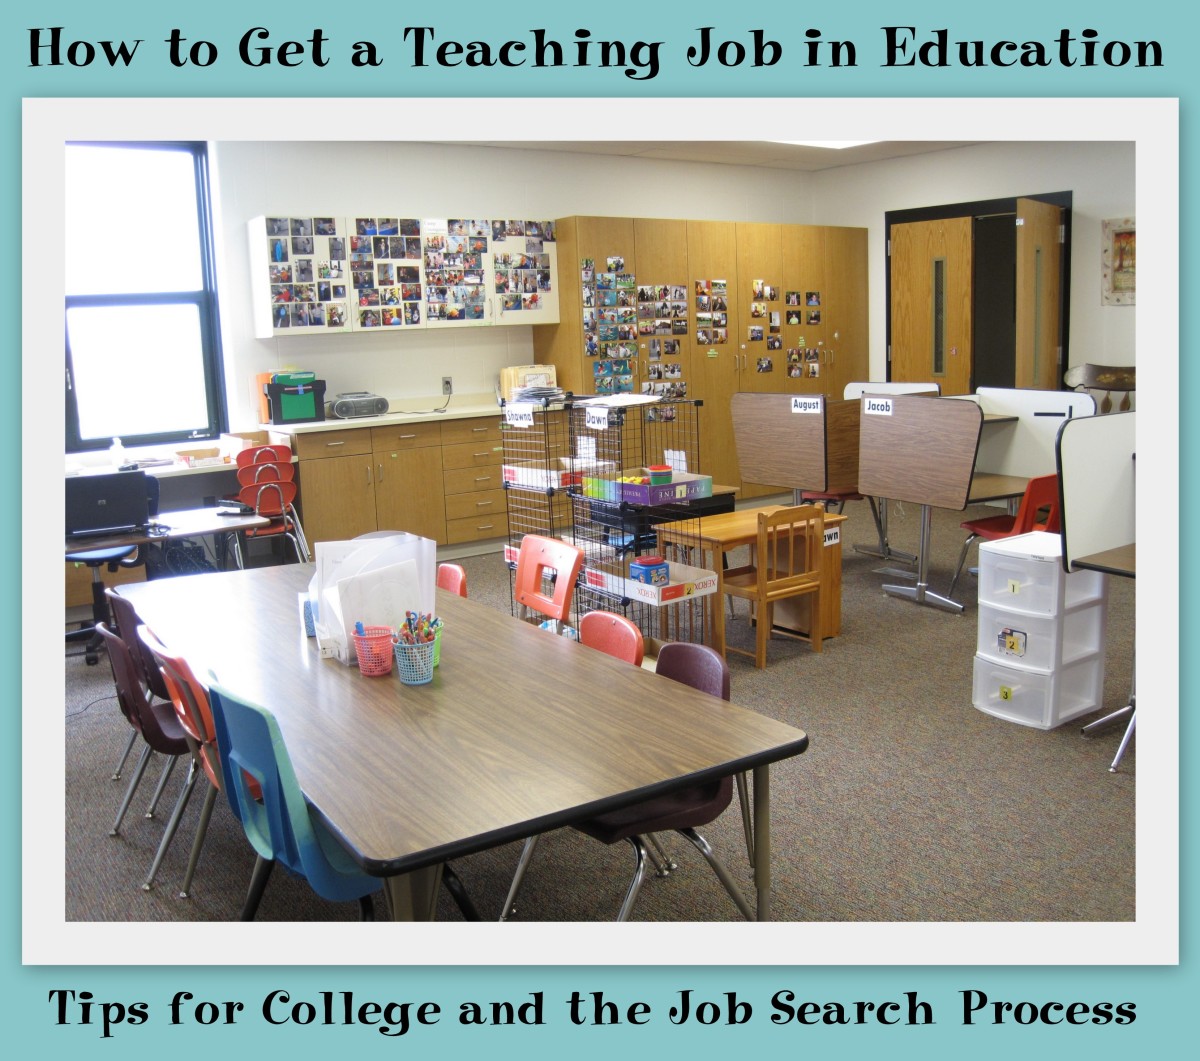 How to Get a Teaching Job in Education: Tips for College and the Job Search Process